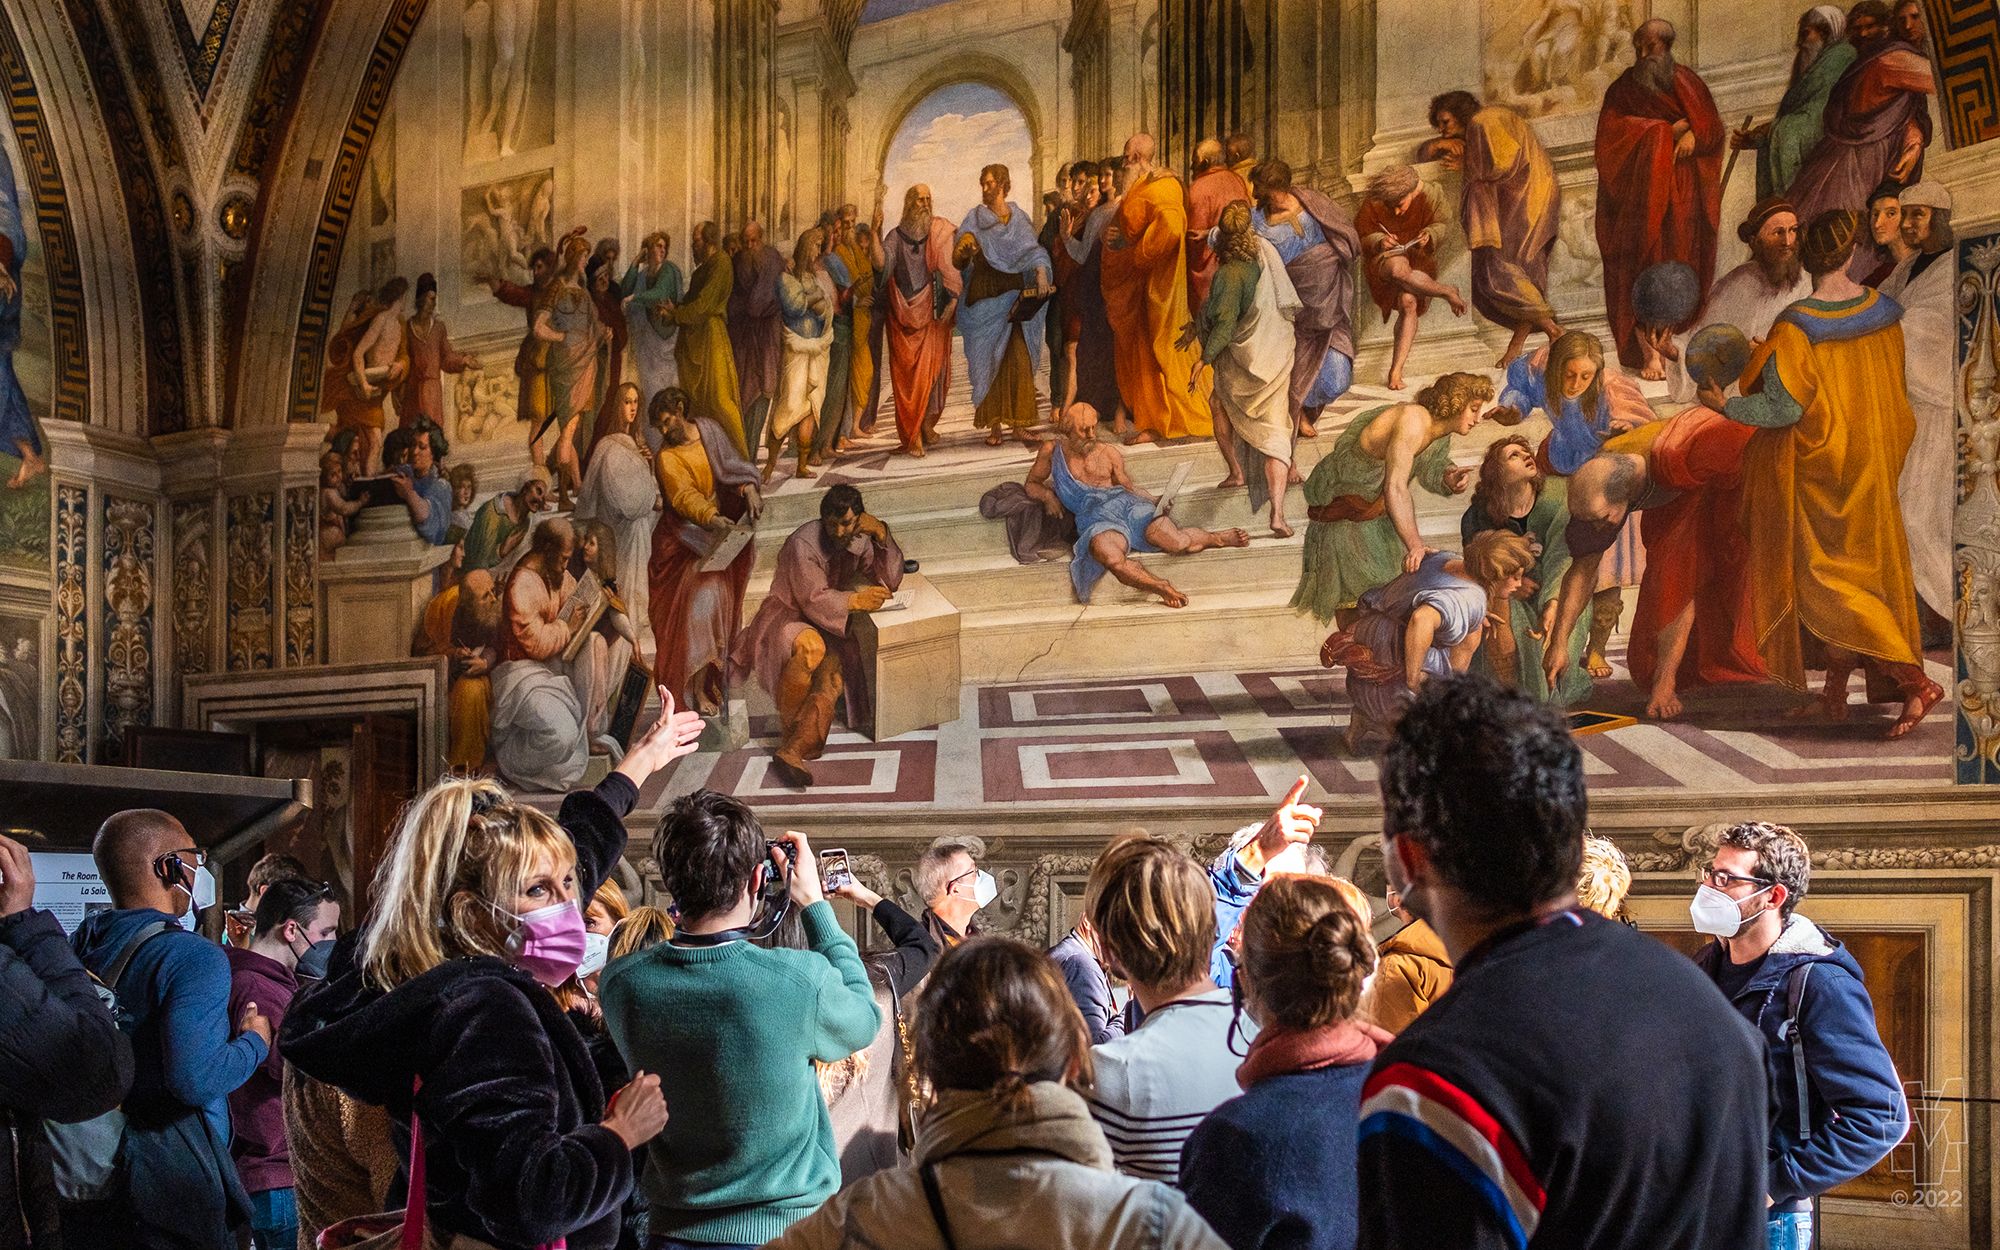 A tour guide shows visitors to the Vatican Museums Raphael's _School of Athens_ fresco. 